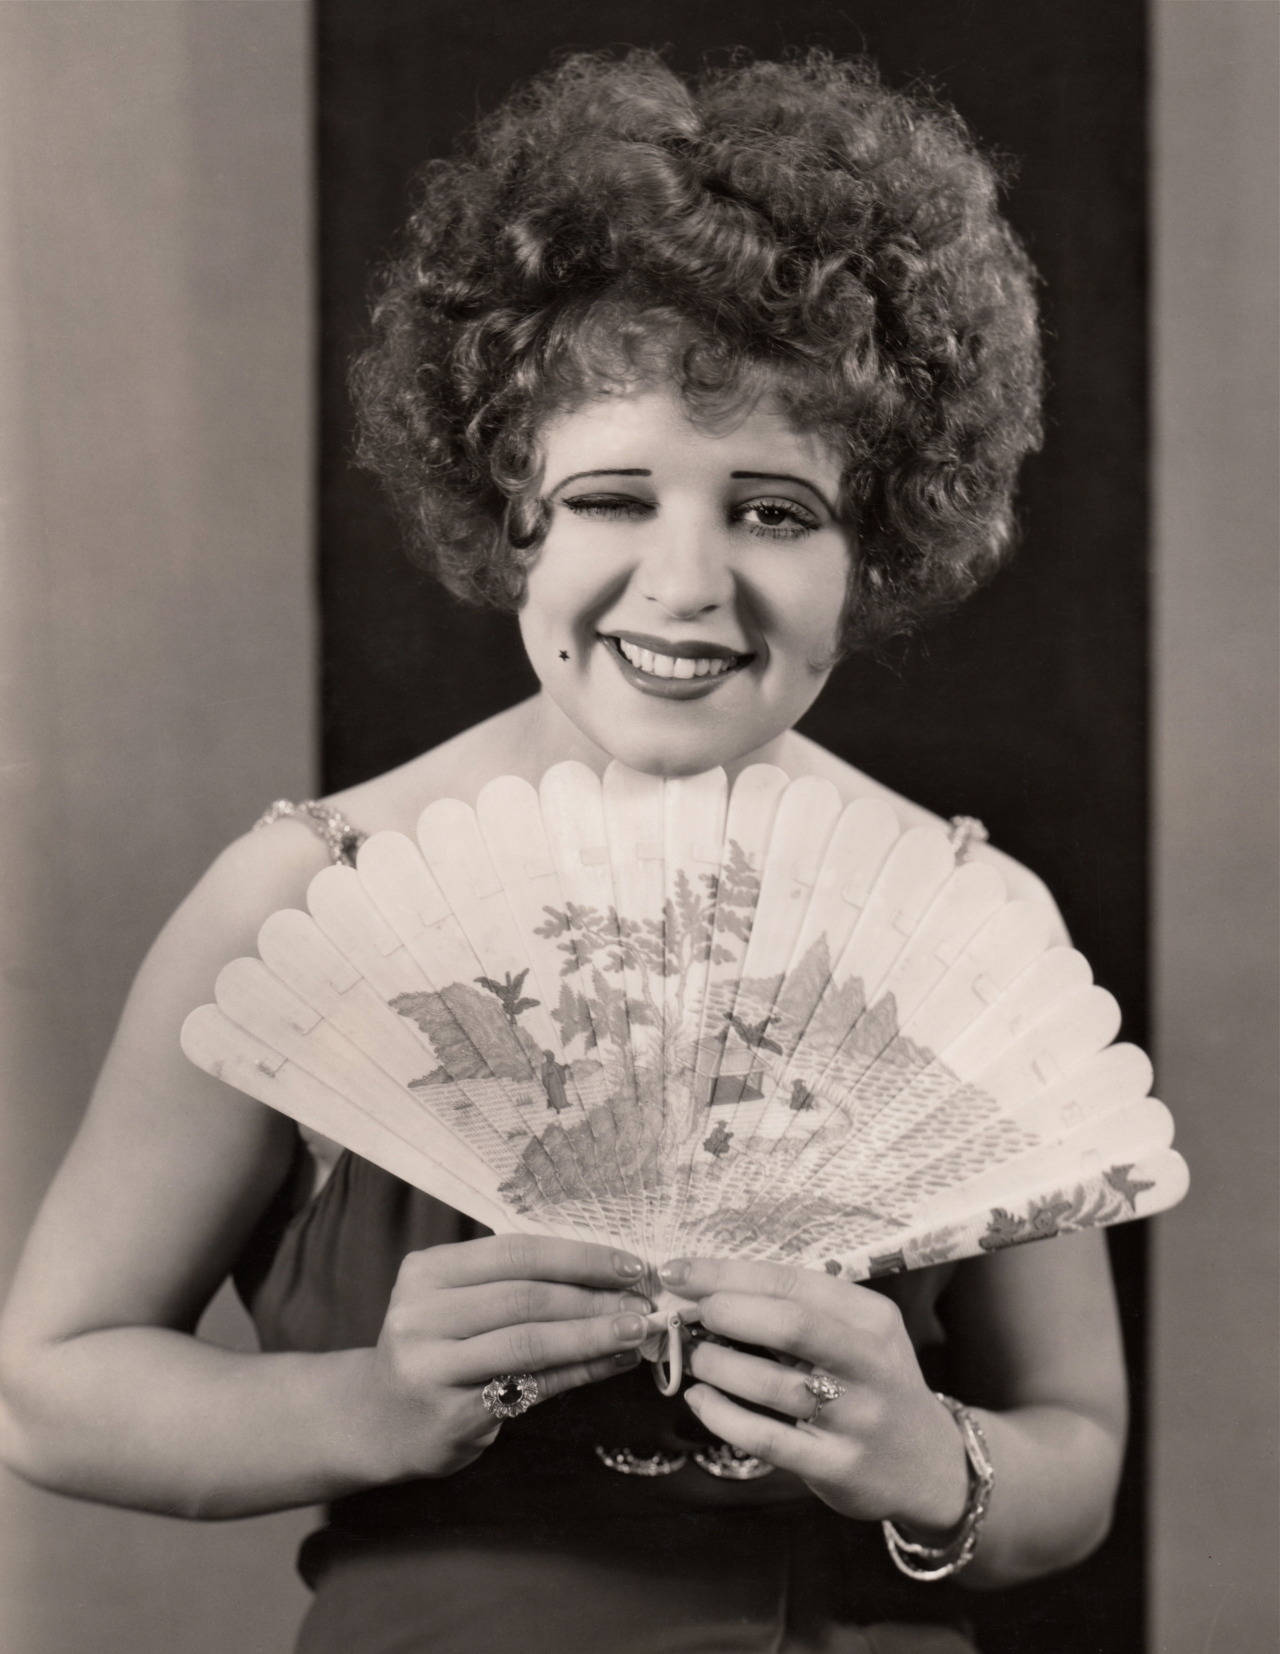 Clarabow-frisyr Would Be The Translation Of 